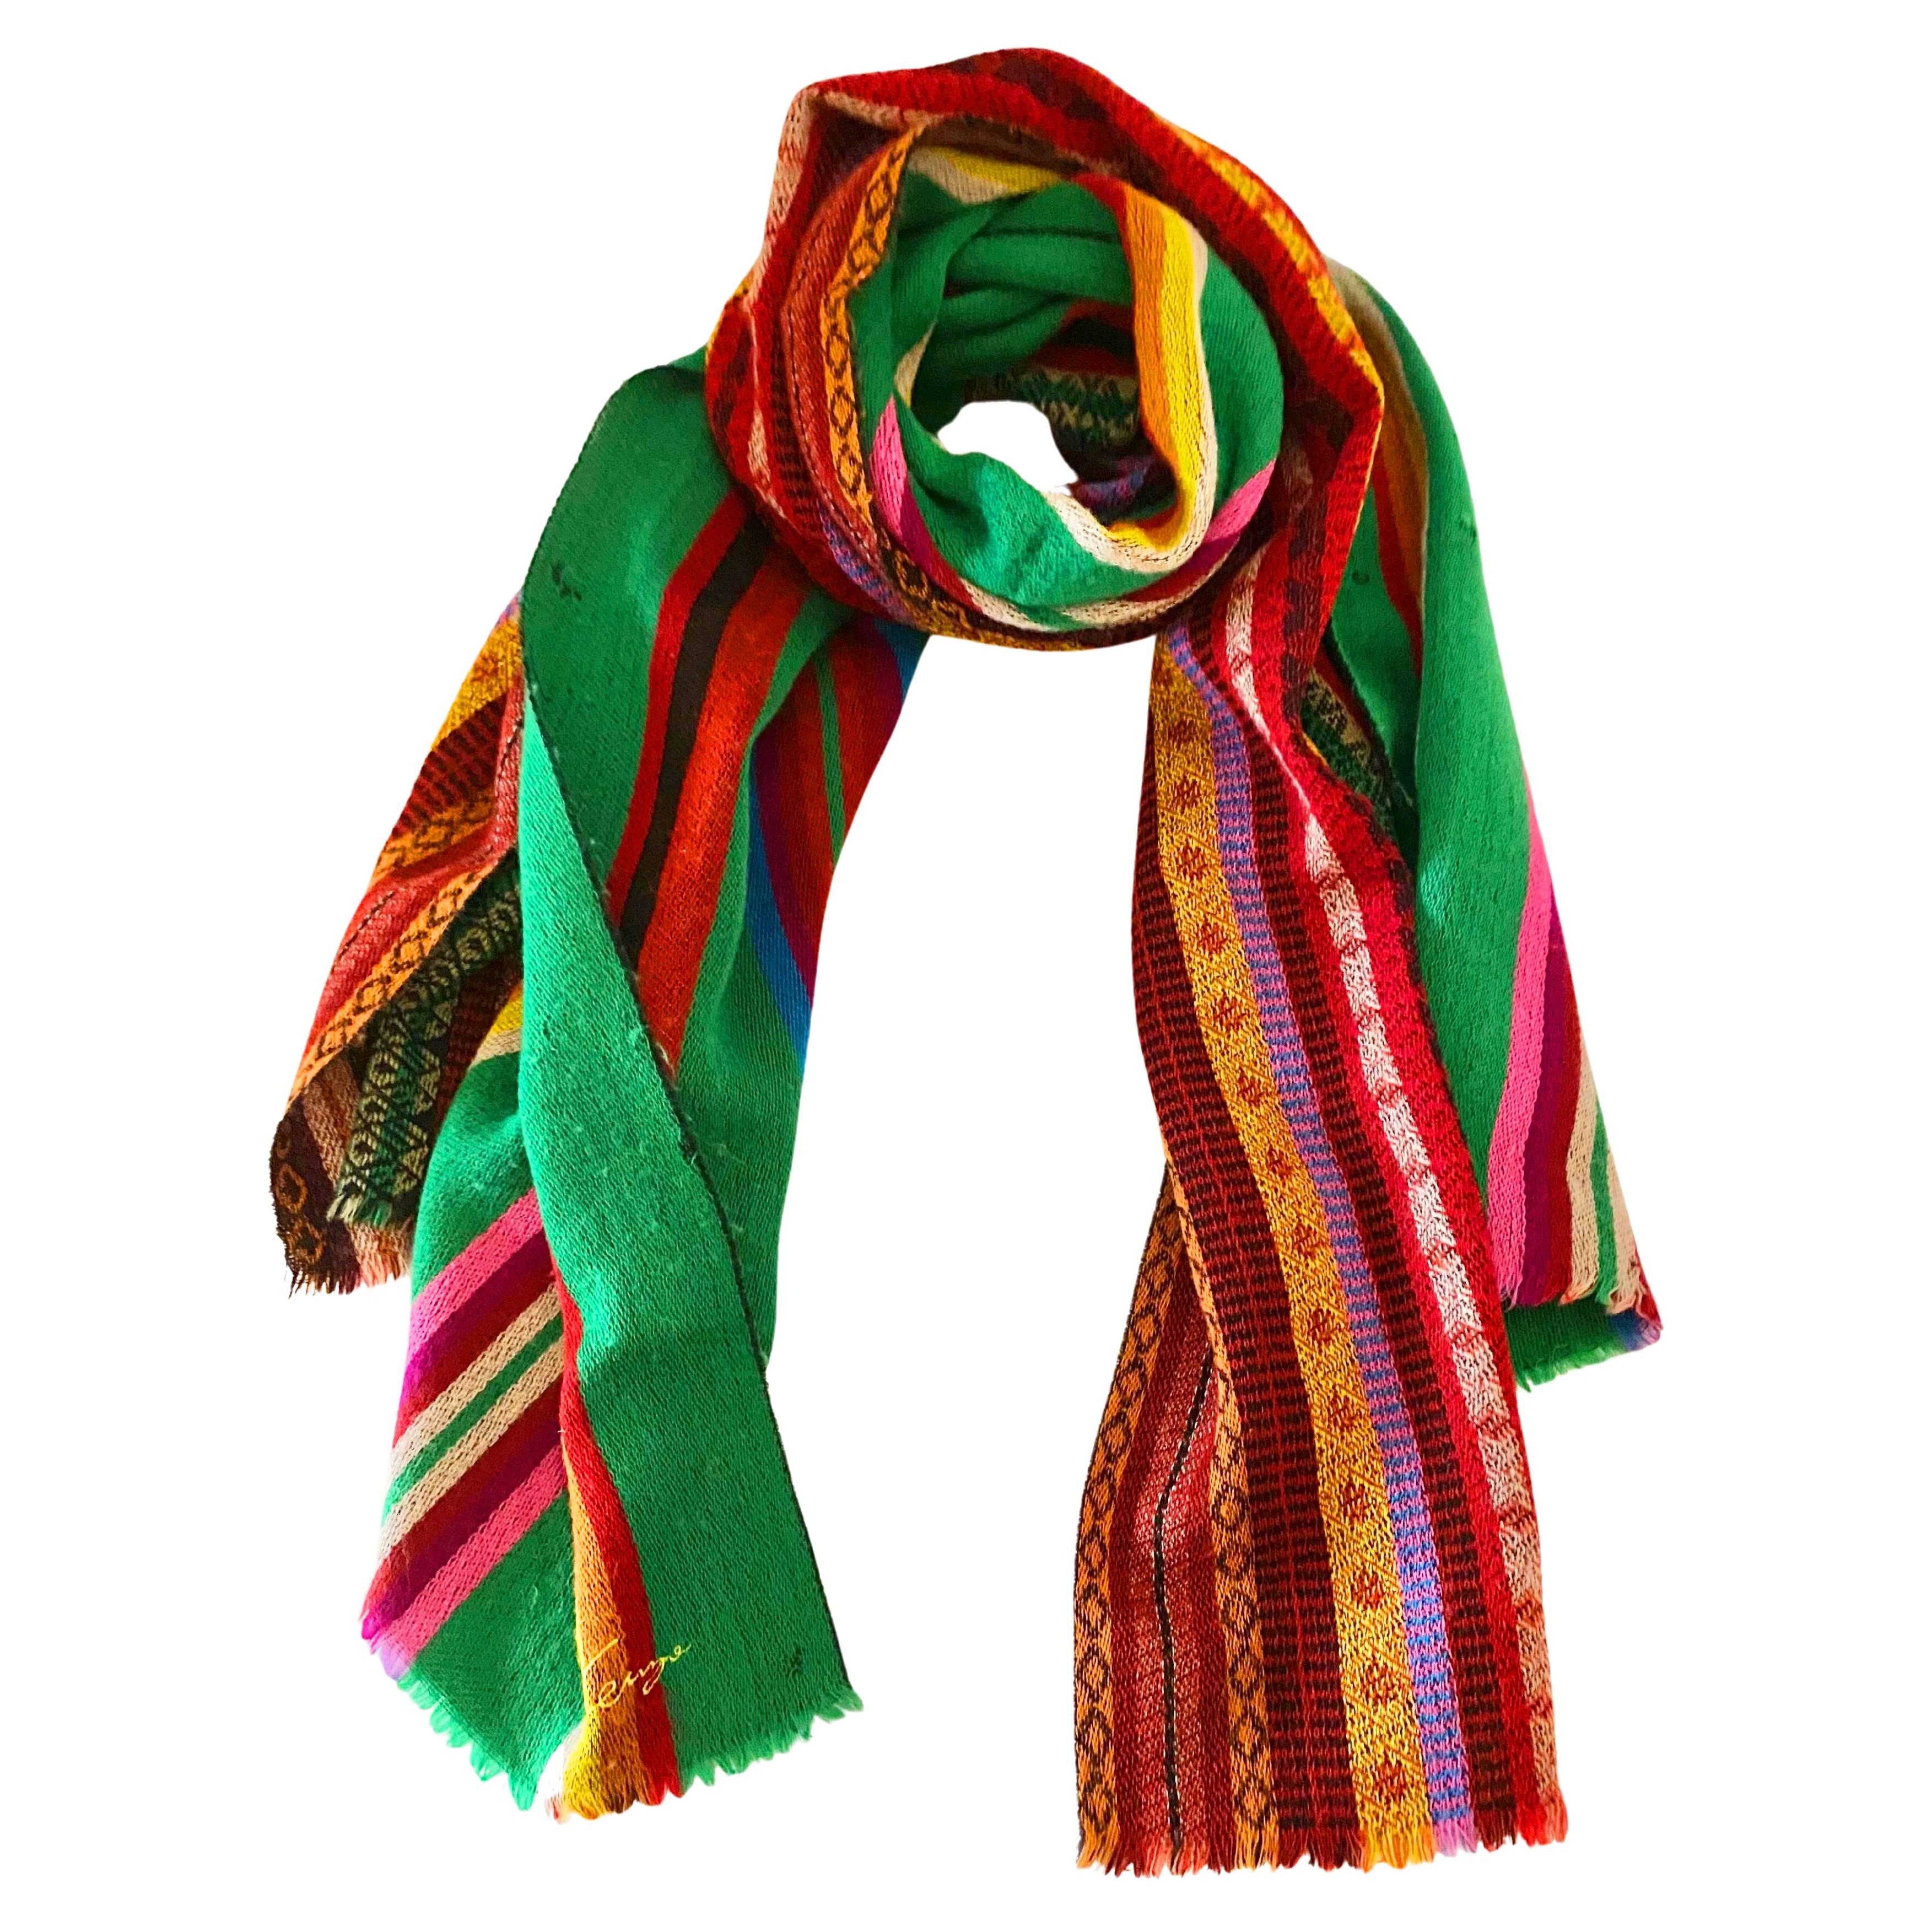 This timeless 1980s Kenzo Tribal Multicolour Wool Wrap Scarf is a testament to classic elegance and sophistication. Featuring a subtle stripe and geometric print, the scarf is a versatile wearable wonder - use it as a cover up or a chic